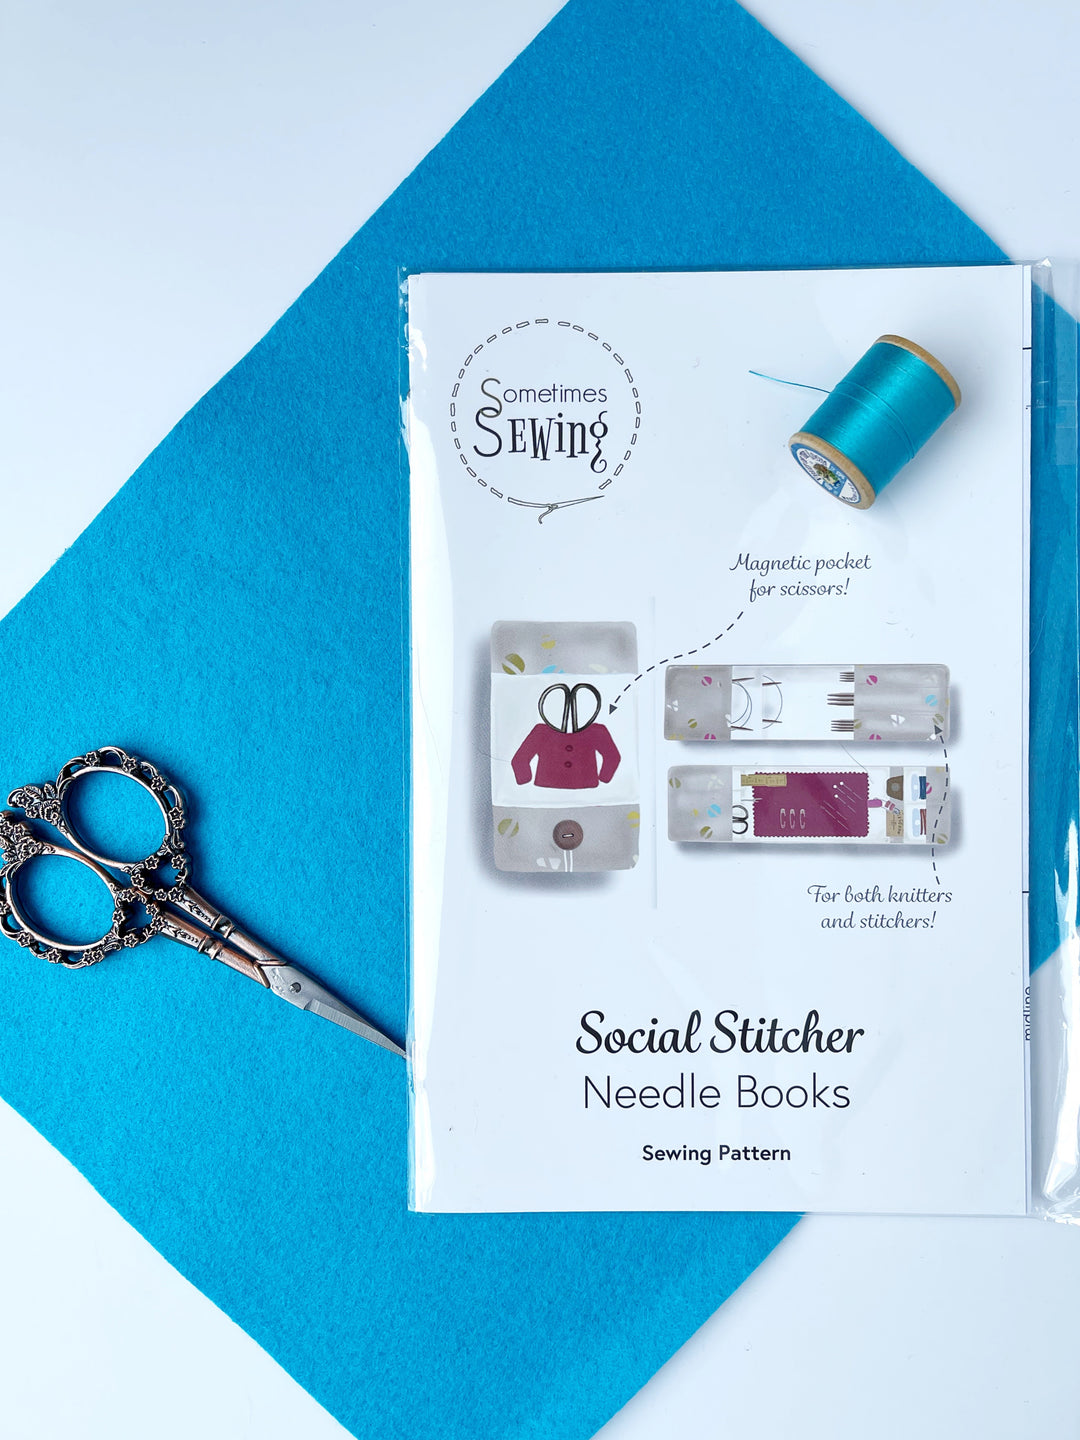 Craftermoon - Social Stitcher Needle Books Sewing Pattern